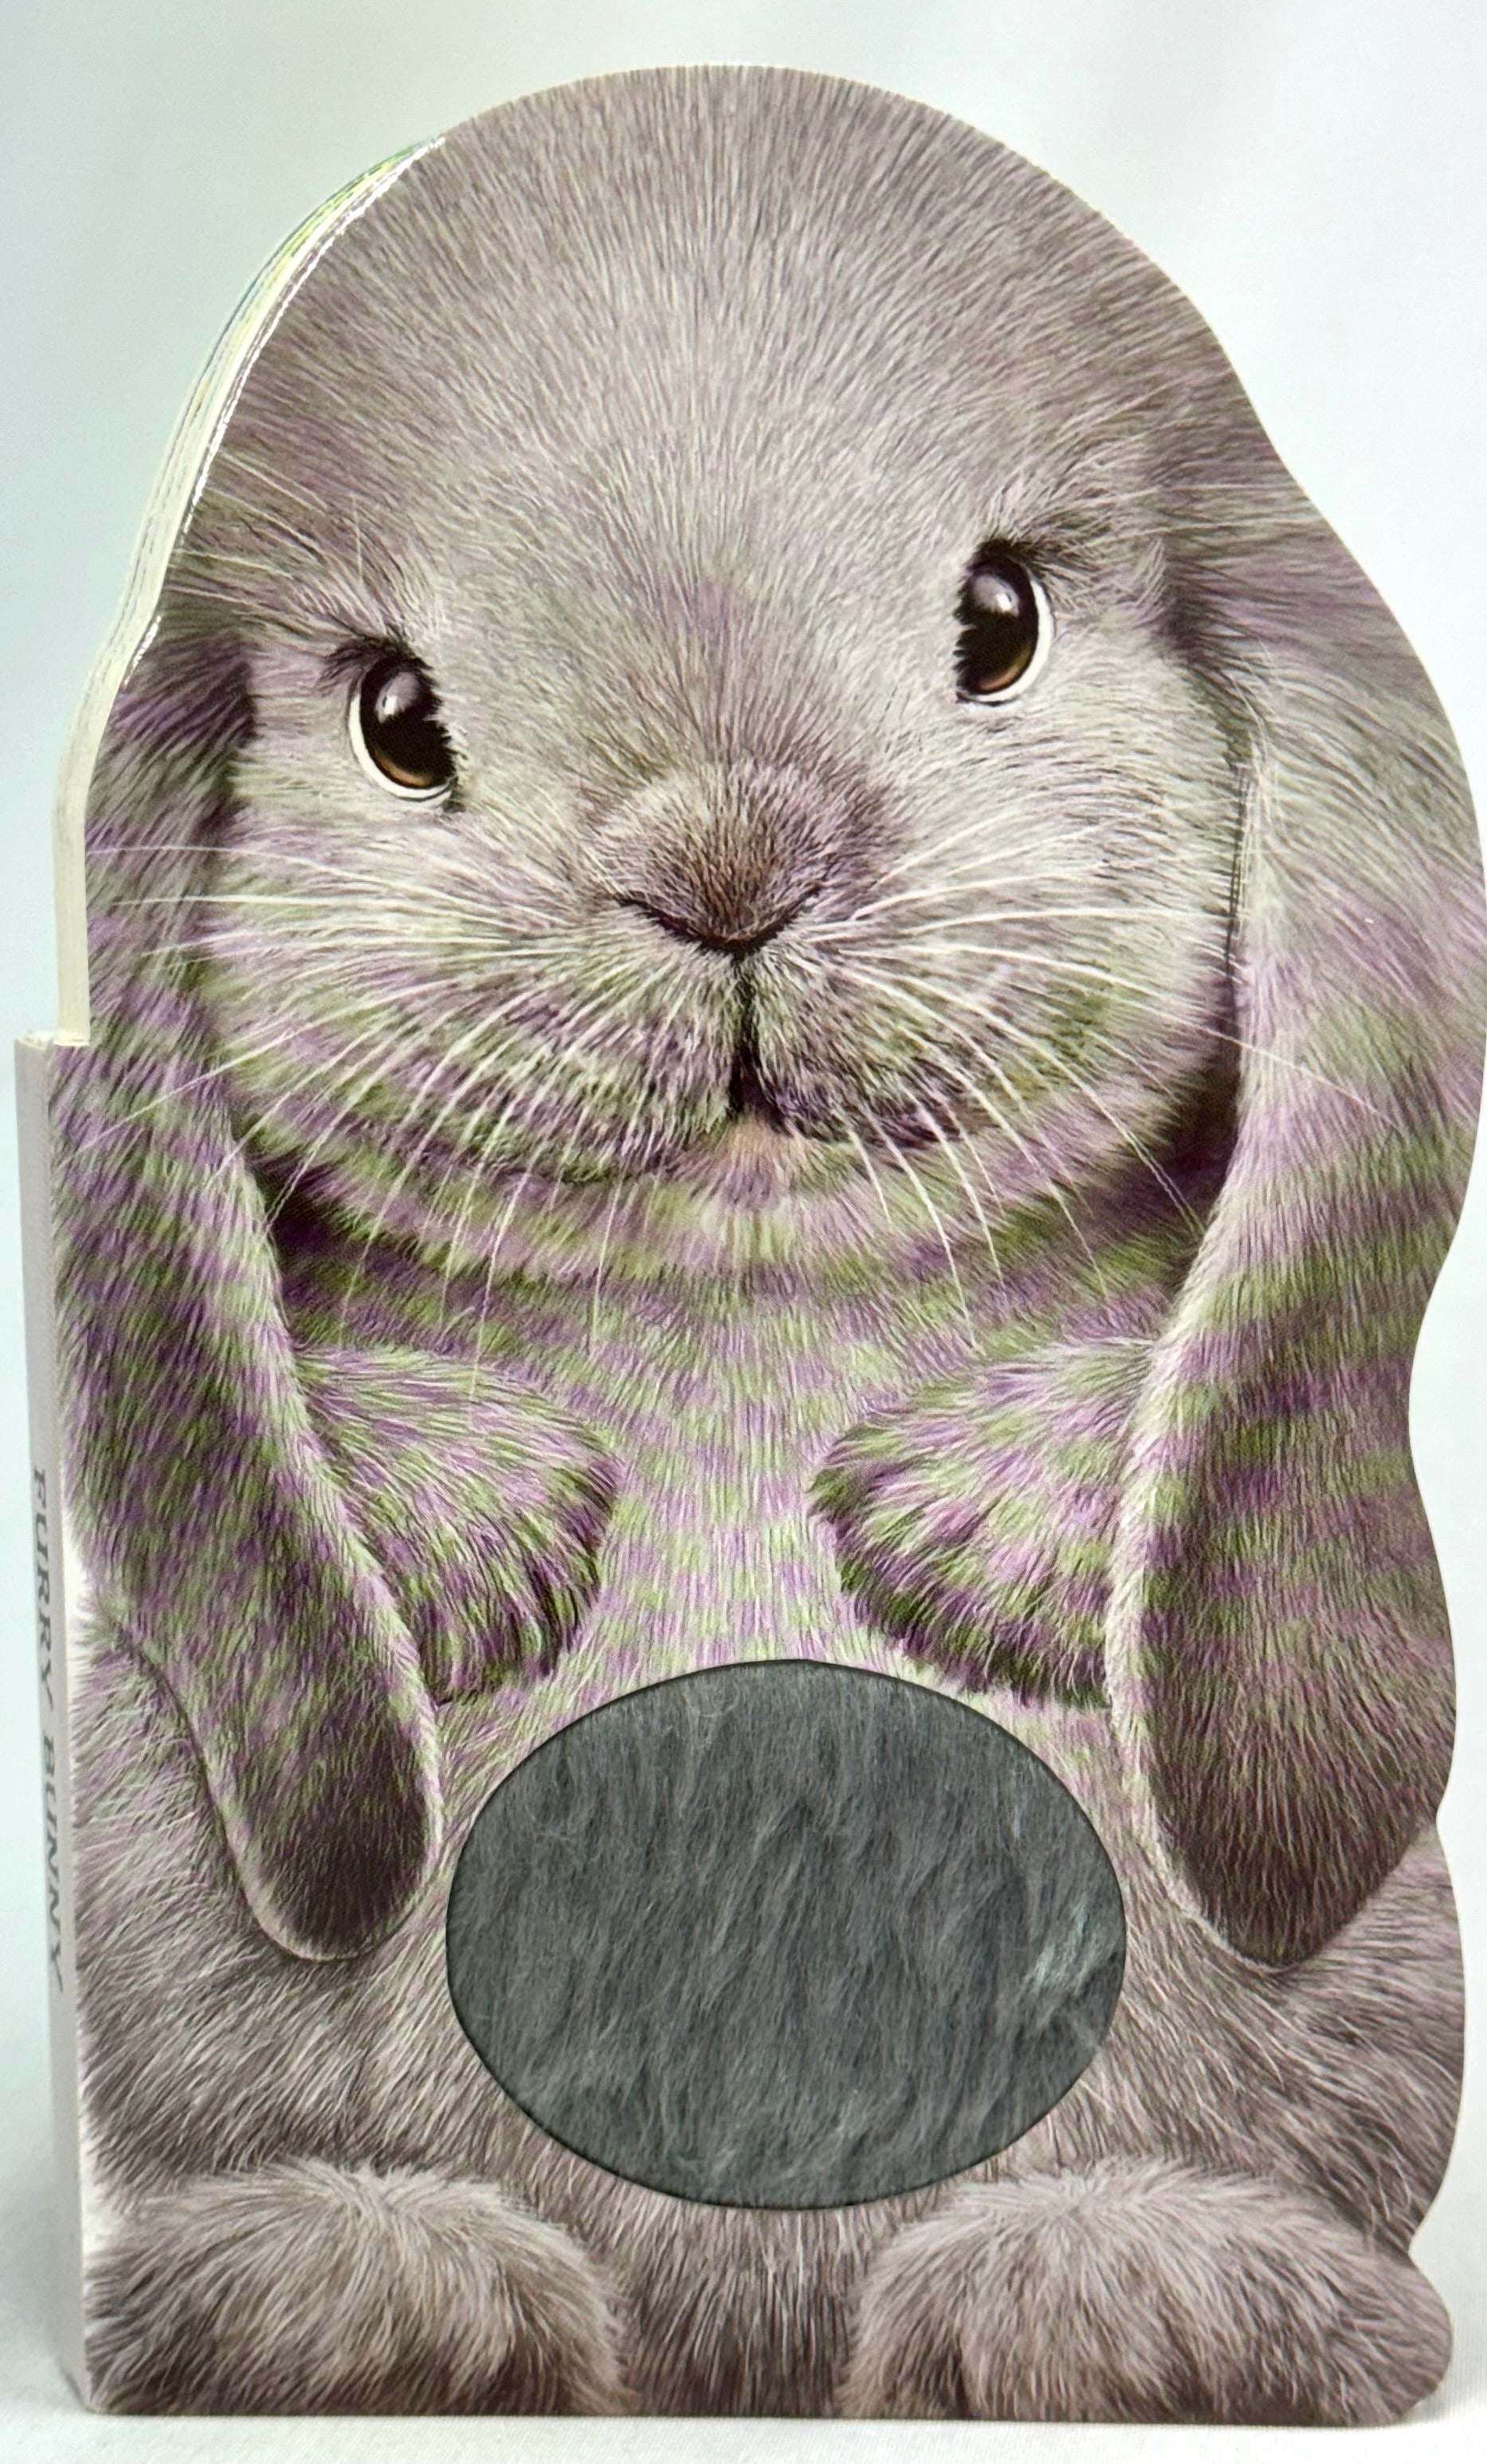 Furry Bunny Board book with Furry Tummy - Clearance